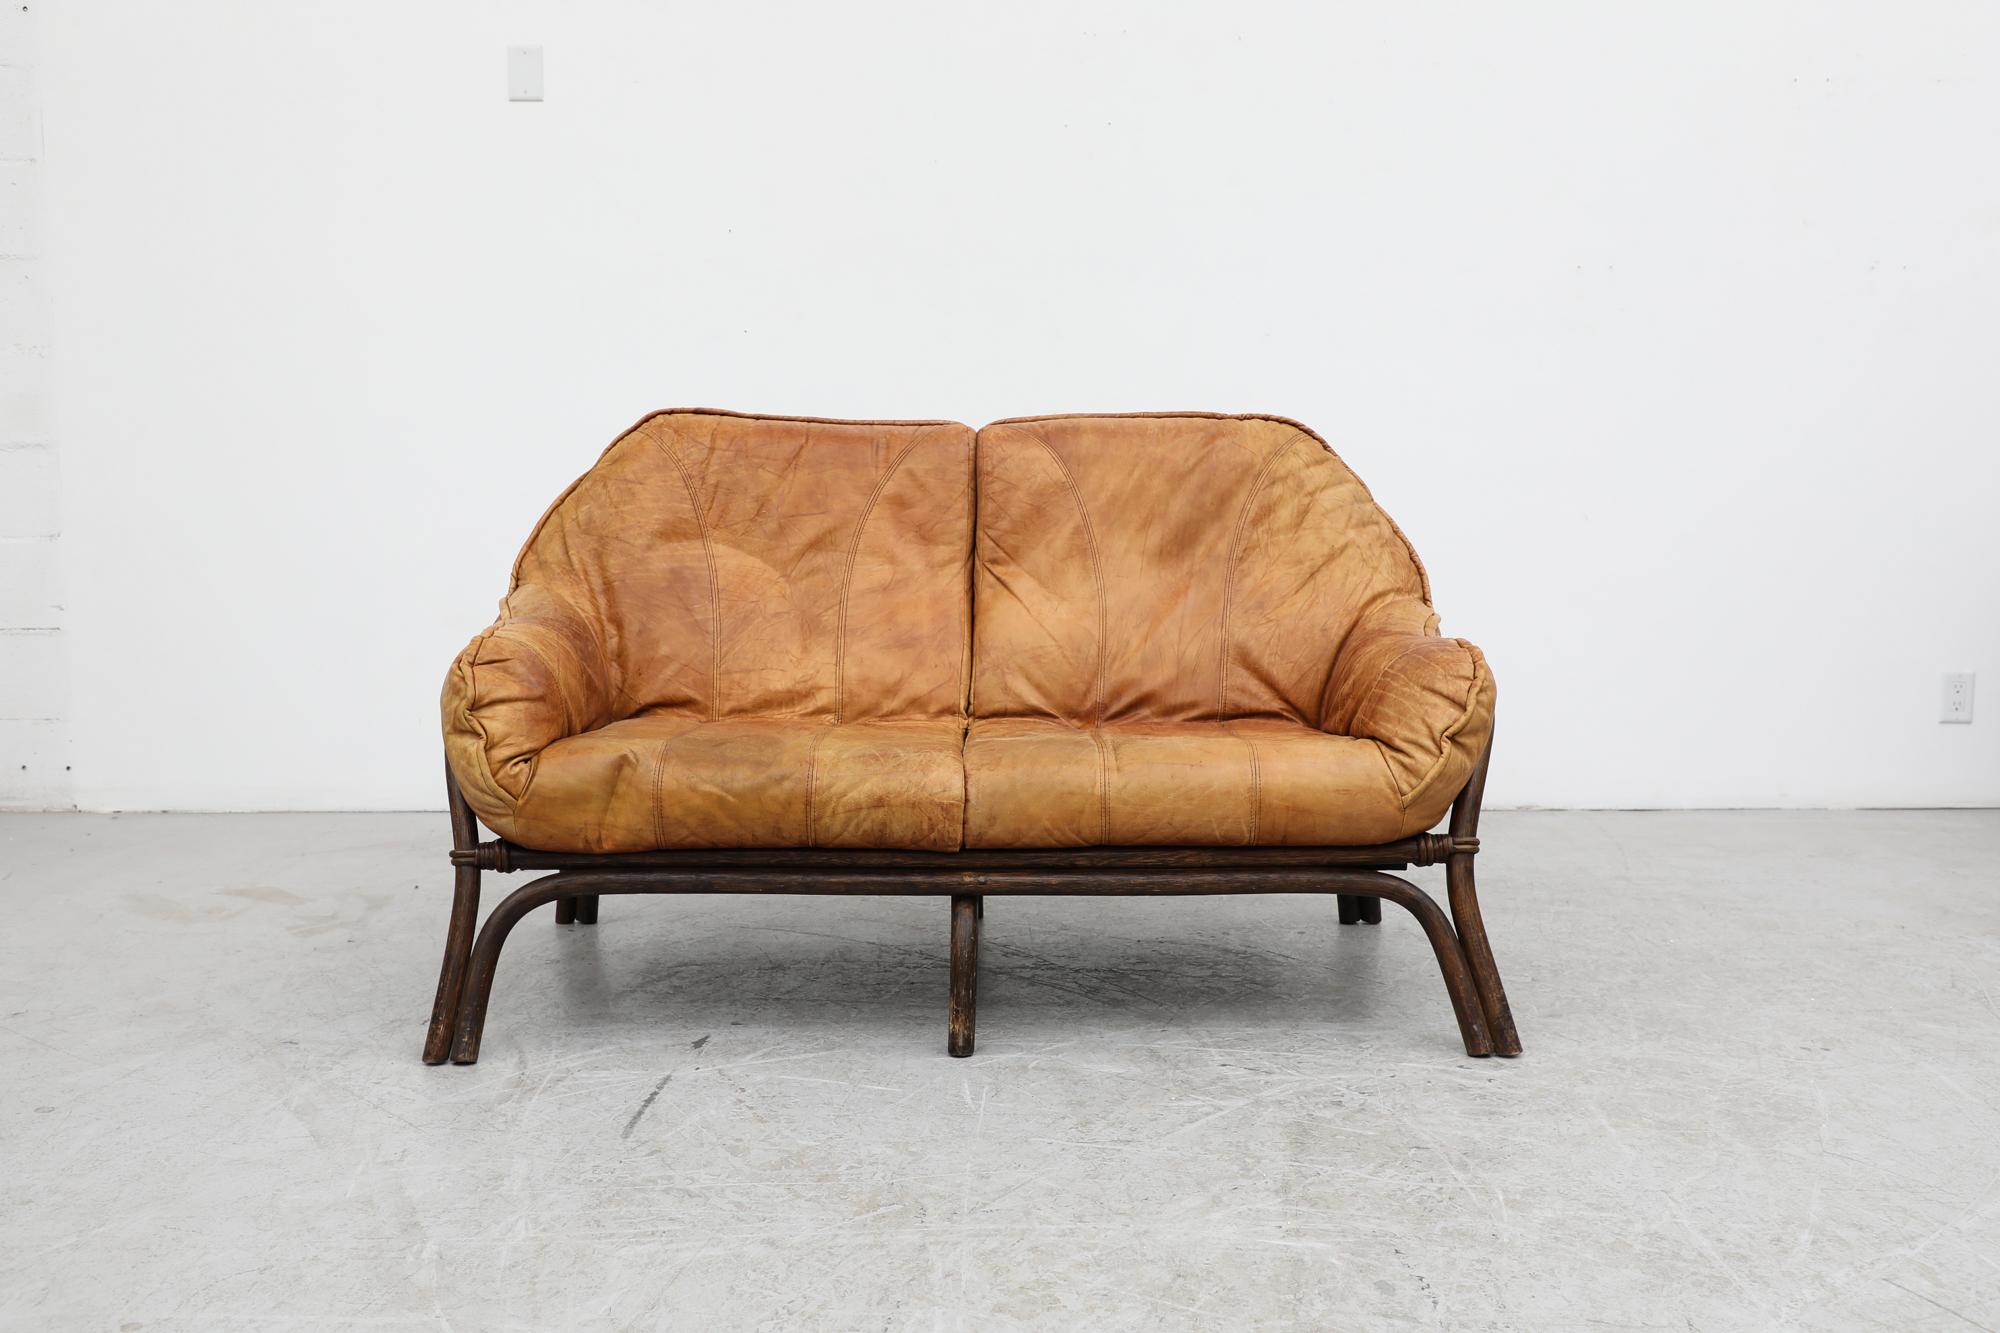 Percival Lafer style brutalist bamboo loveseat with cognac leather cushions. In original condition with a handsome patina and wear consistent with its age and use. Other bamboo pieces are available and listed separately.